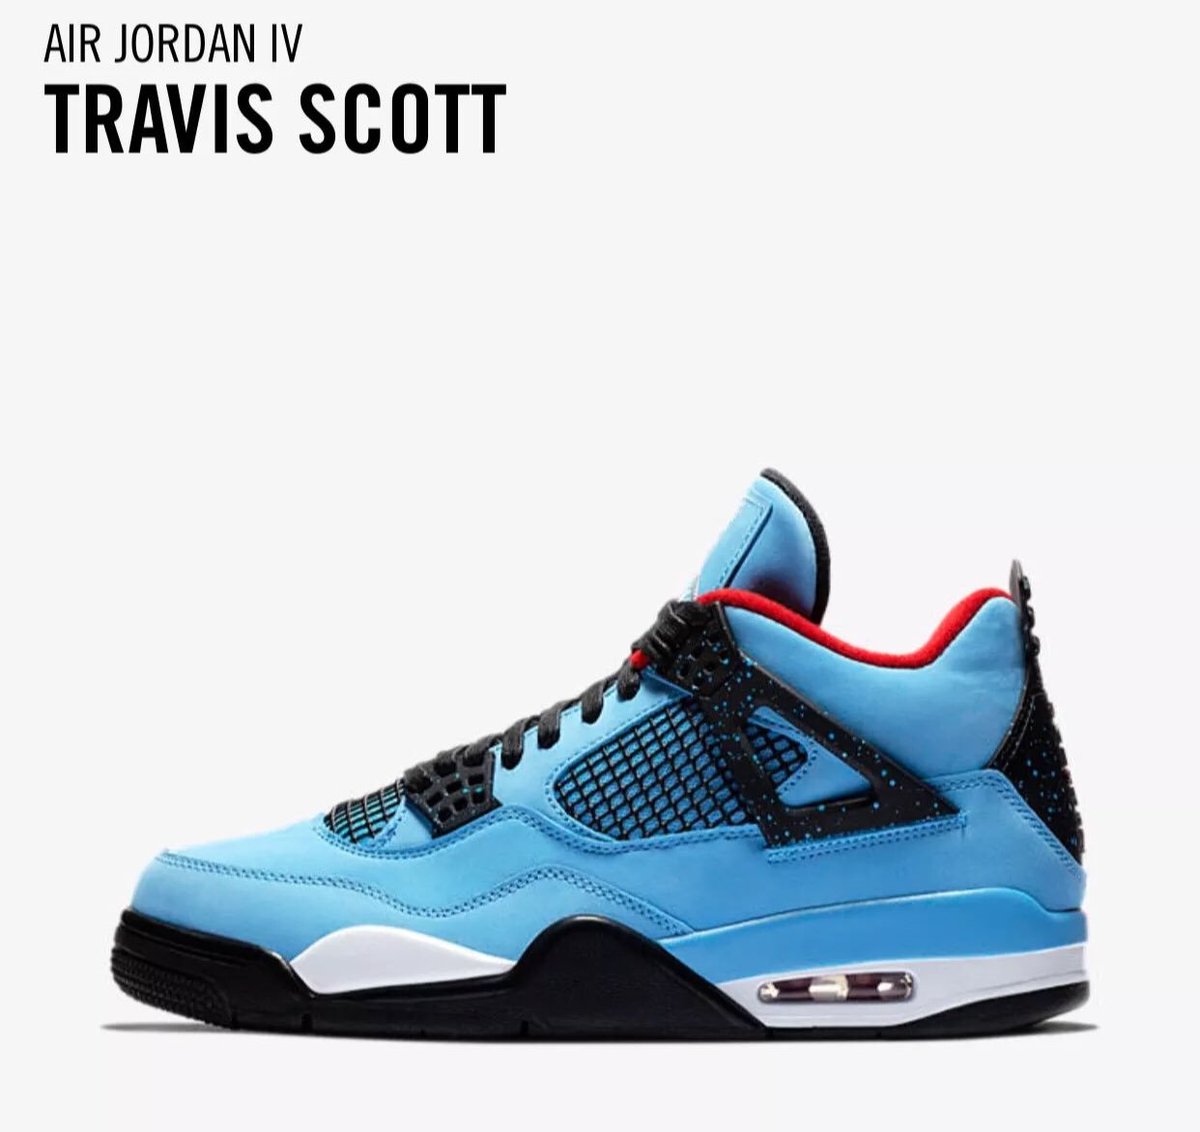 Wasn’t able to secure these on release day!!! Had to finally breakdown and buy a pair at resale price!!! #nike #travisscott #jordan4 #AirJordan #JordanIV